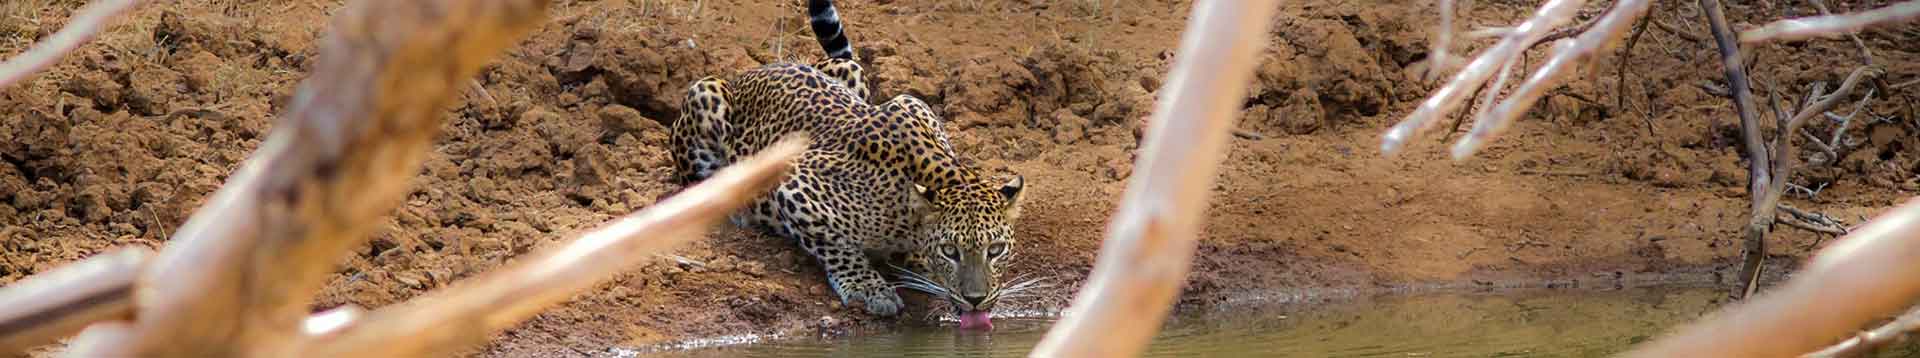 Sri Lanka Leopard drinking water by a water puddle